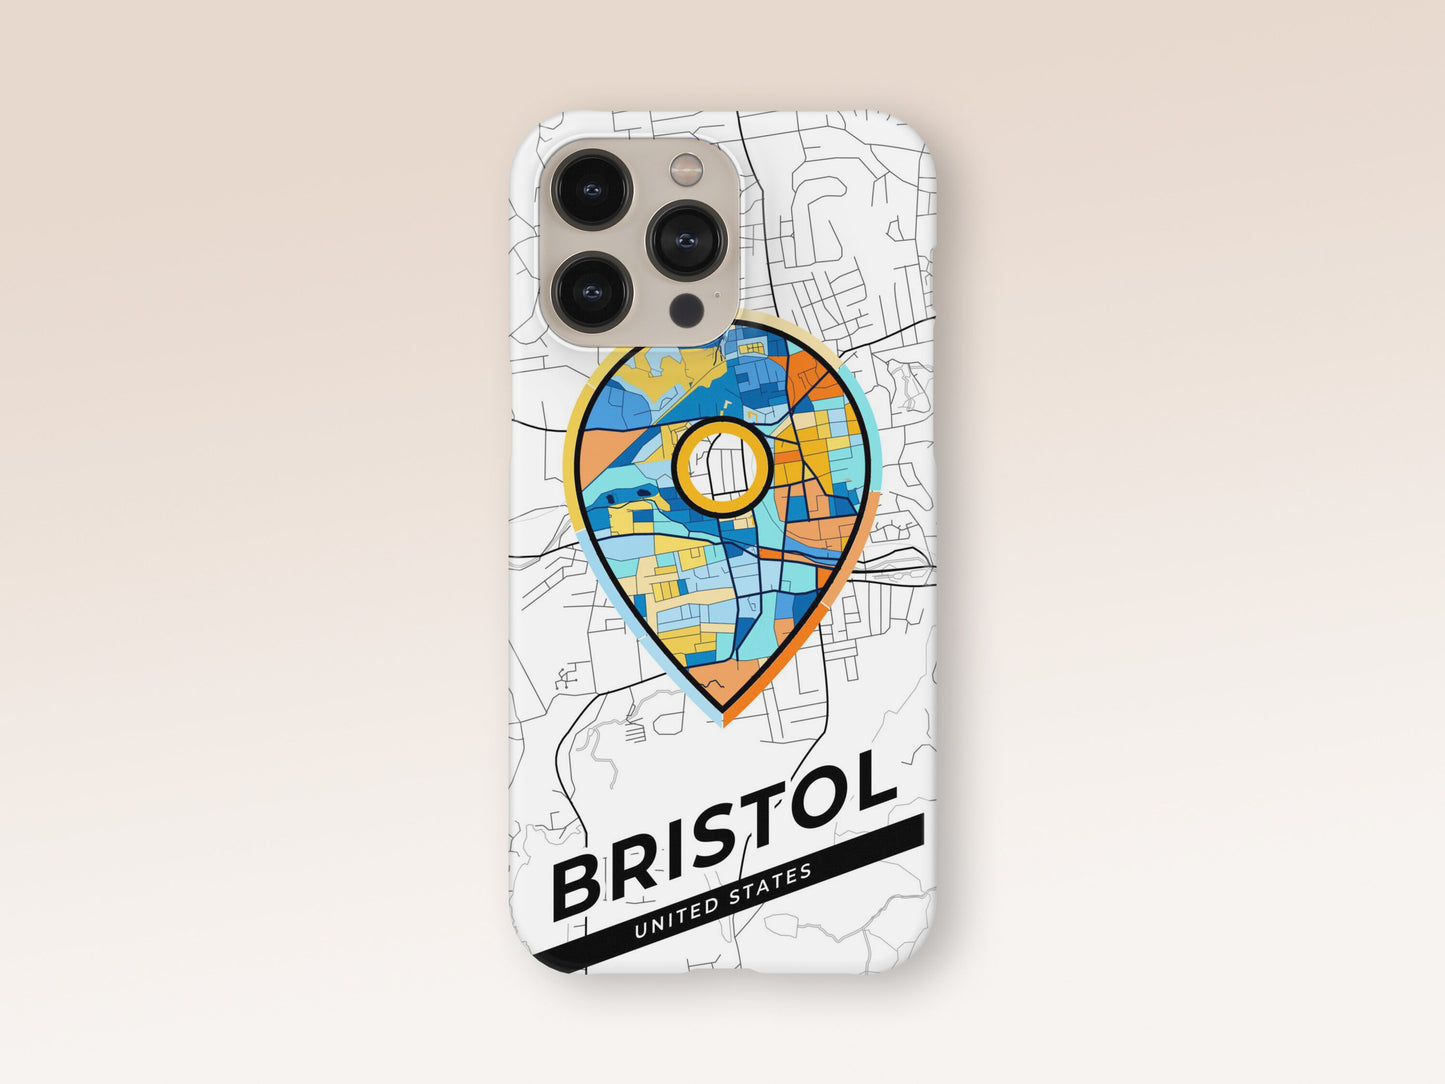 Bristol Connecticut slim phone case with colorful icon. Birthday, wedding or housewarming gift. Couple match cases. 1